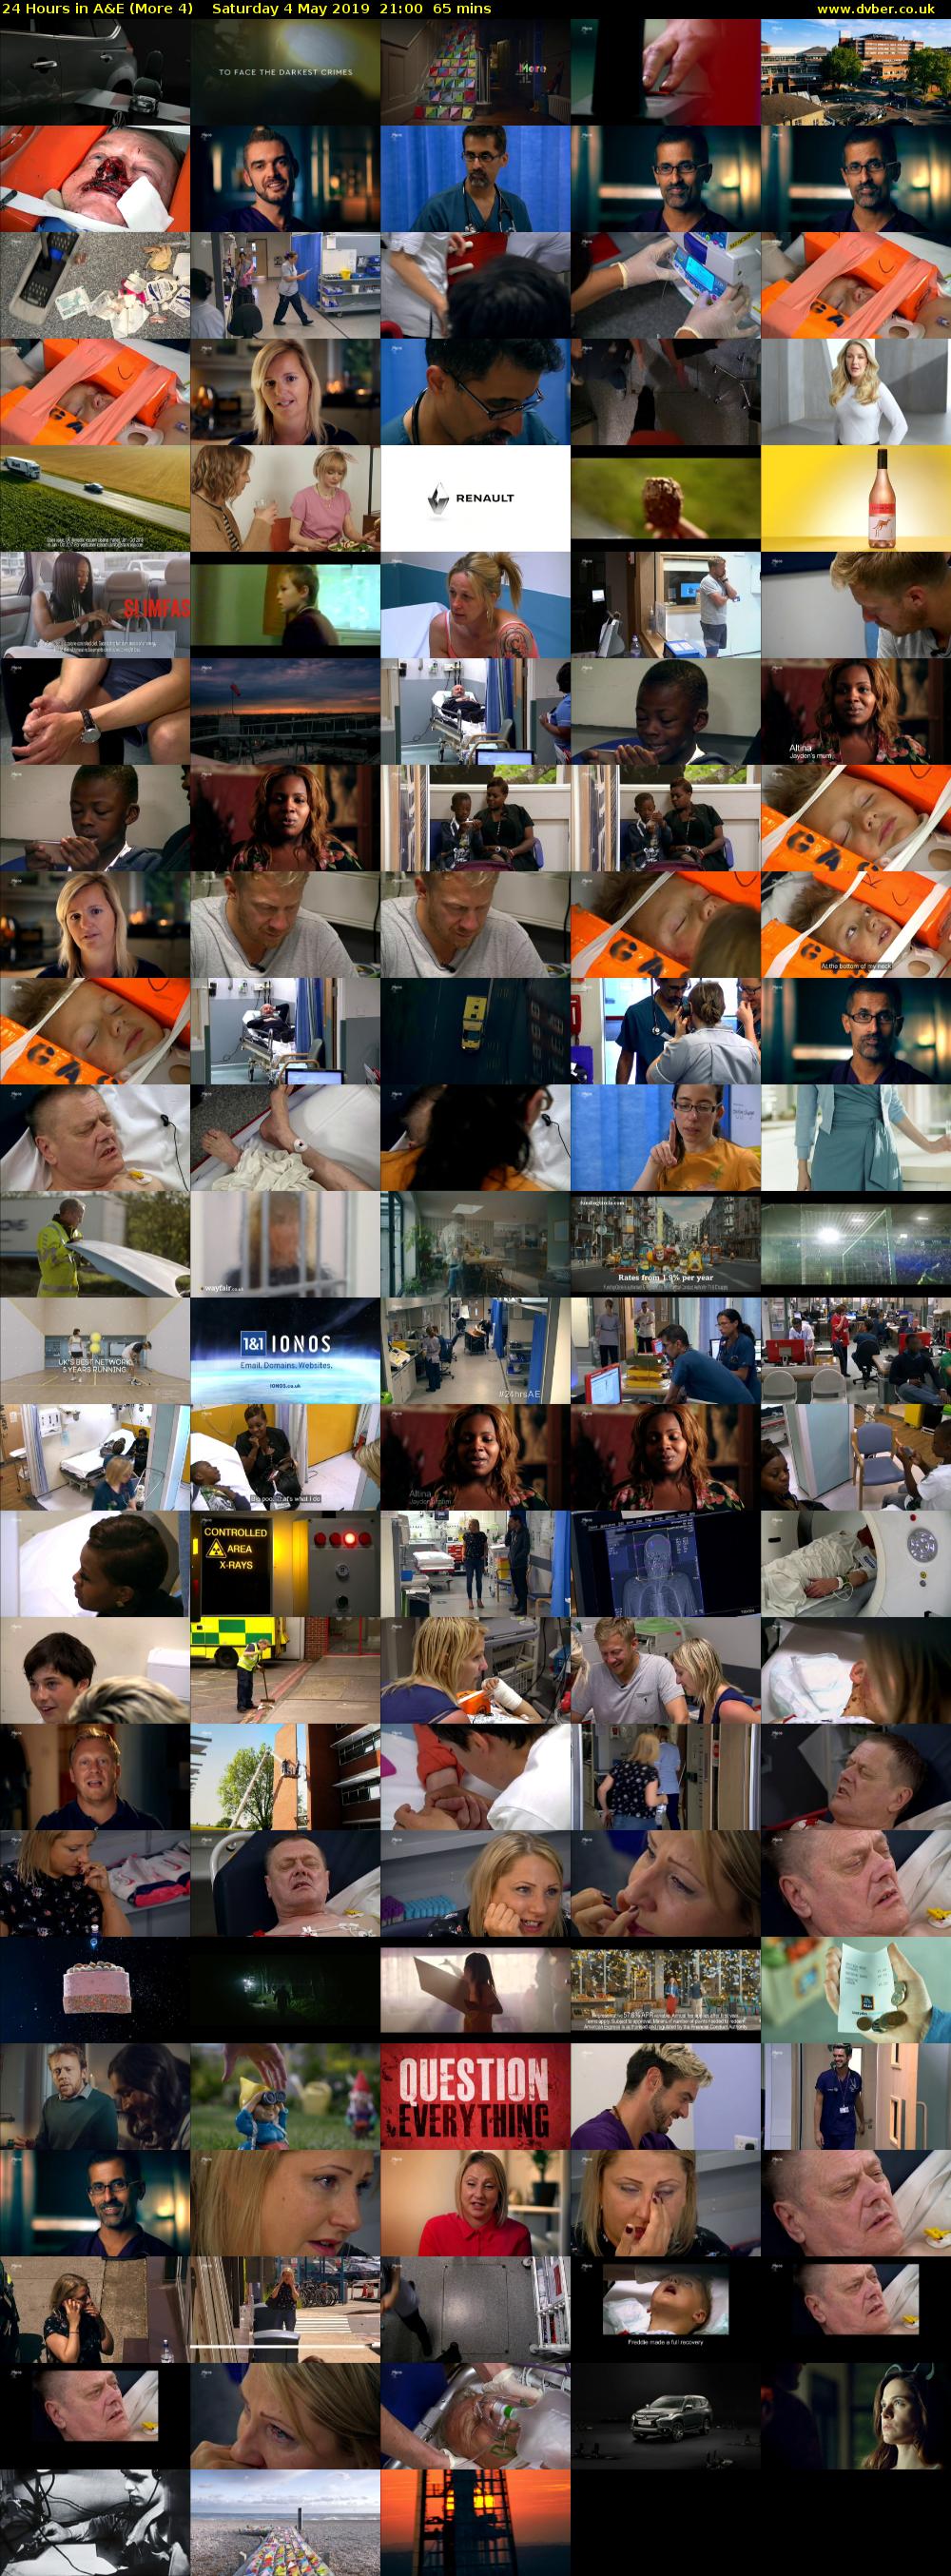 24 Hours in A&E (More 4) Saturday 4 May 2019 21:00 - 22:05